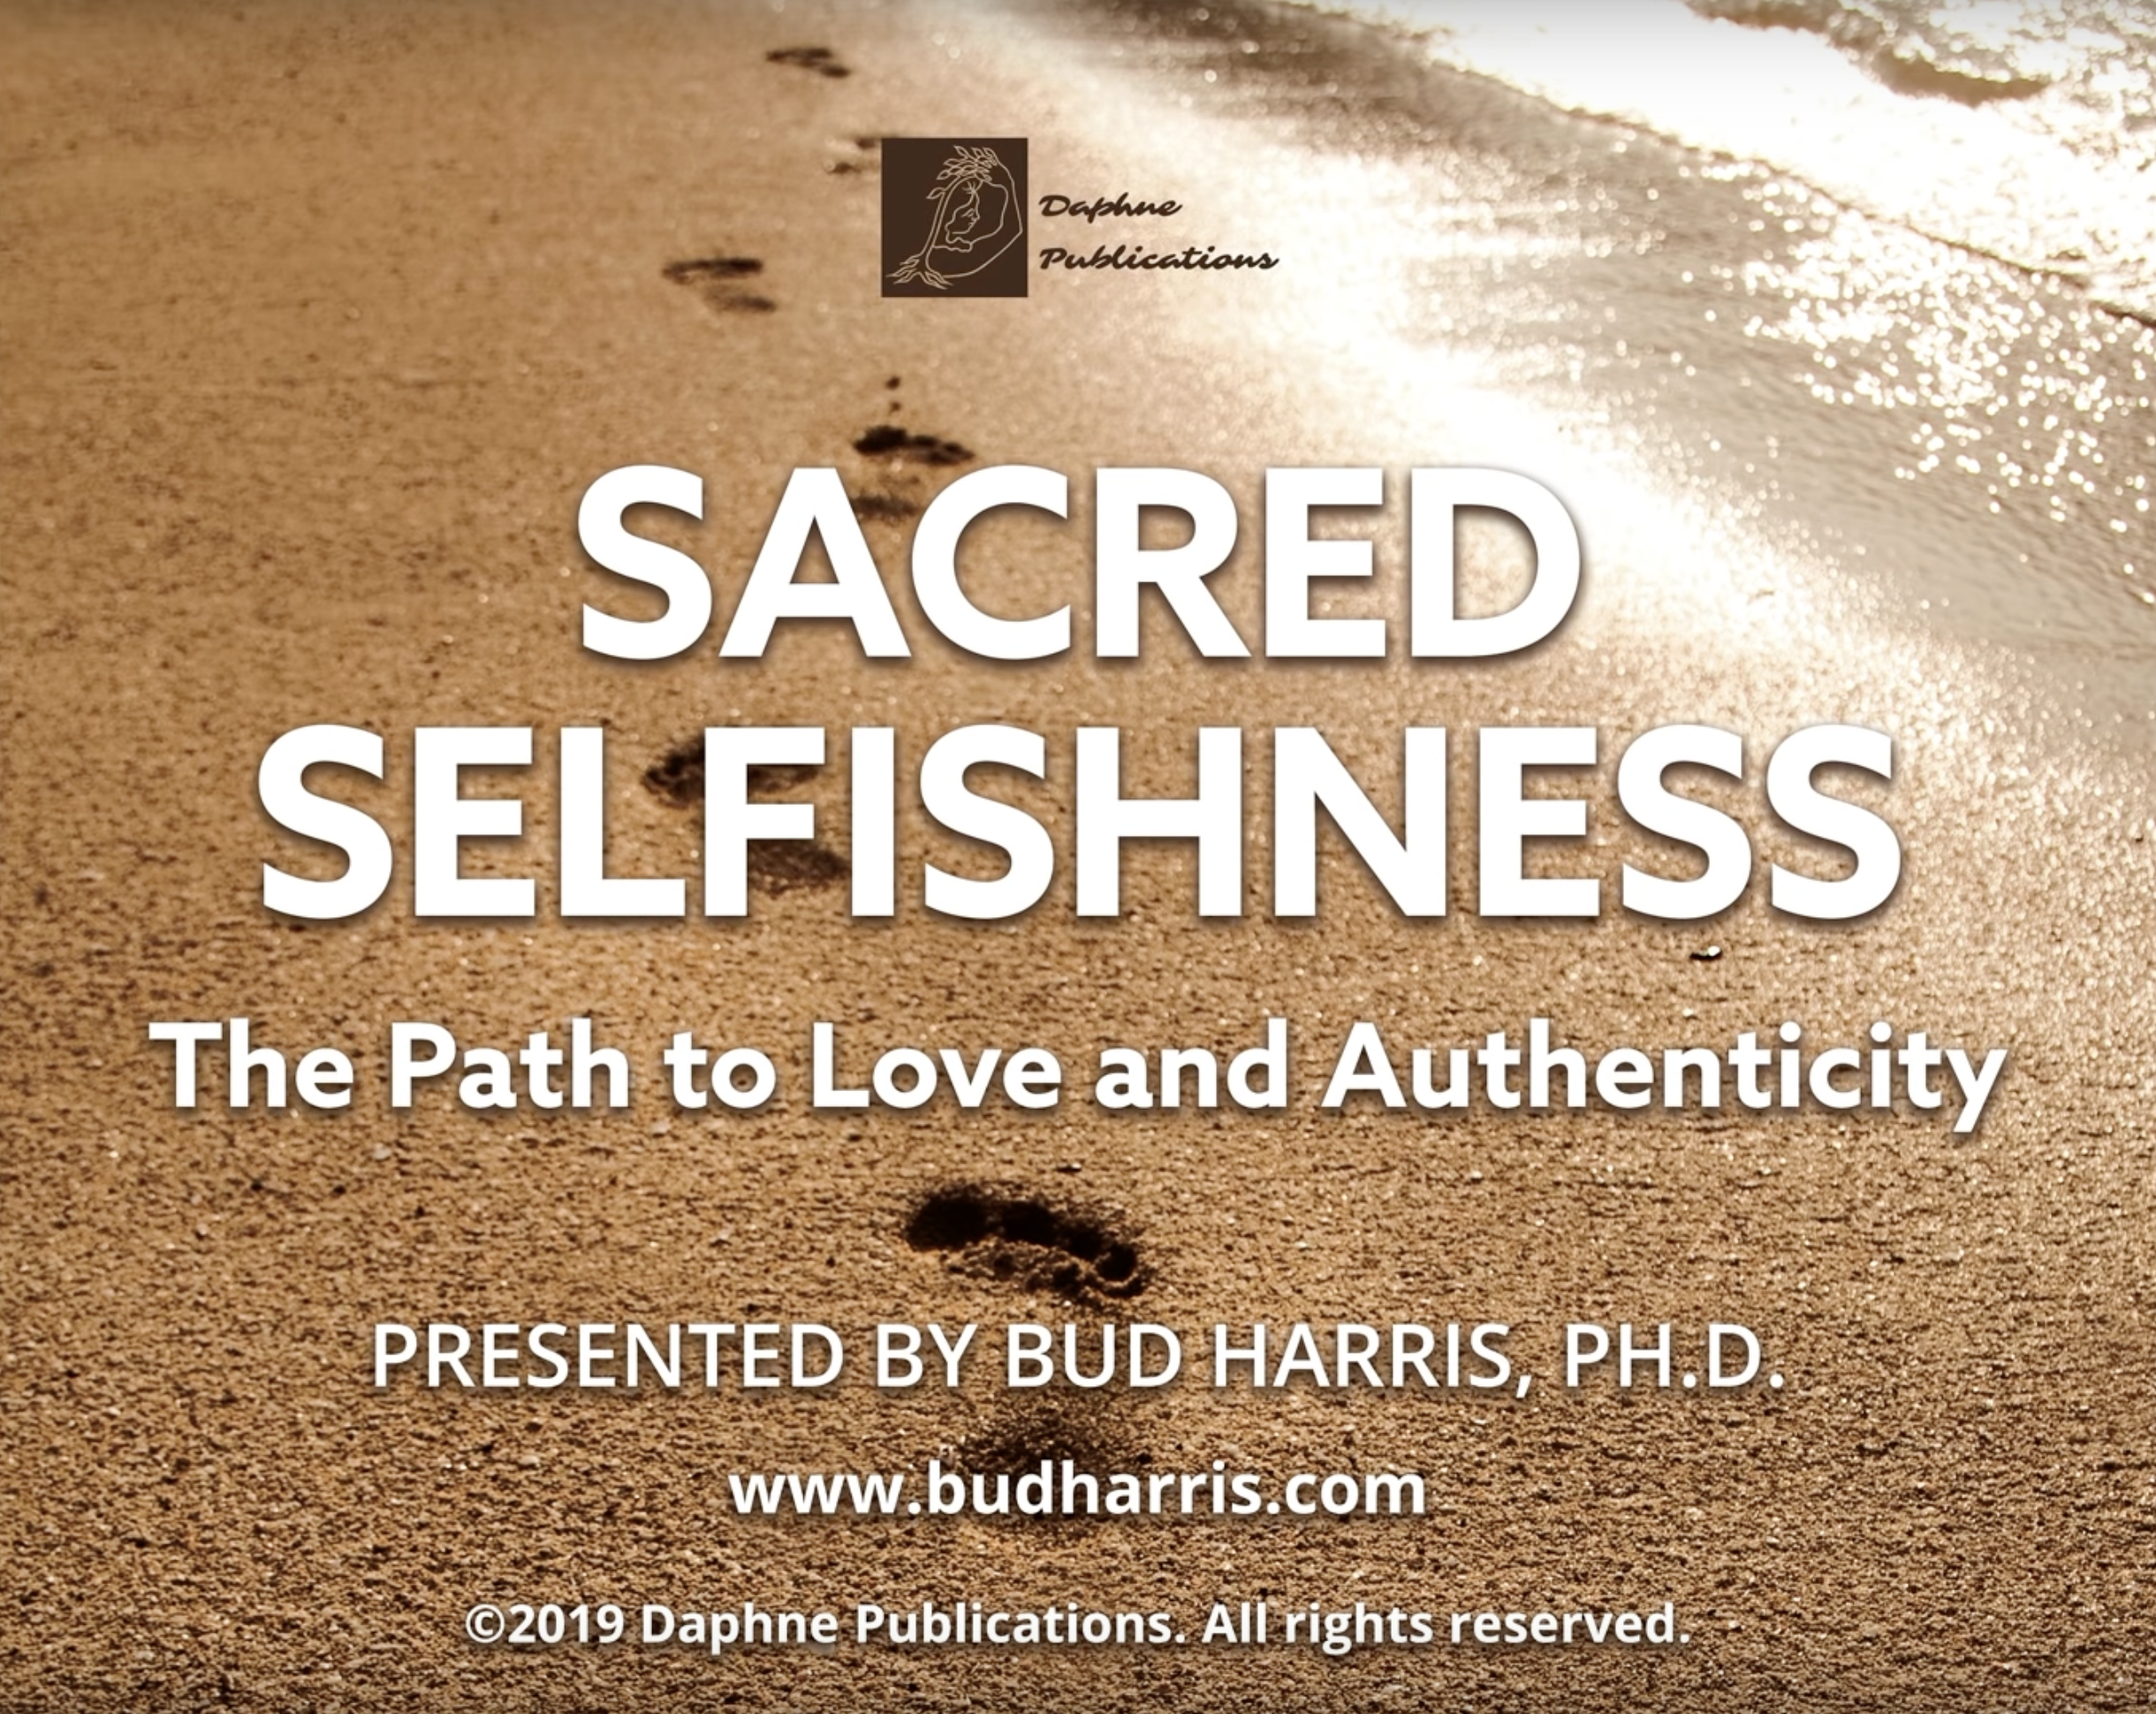 Sacred Selfishness lecture video